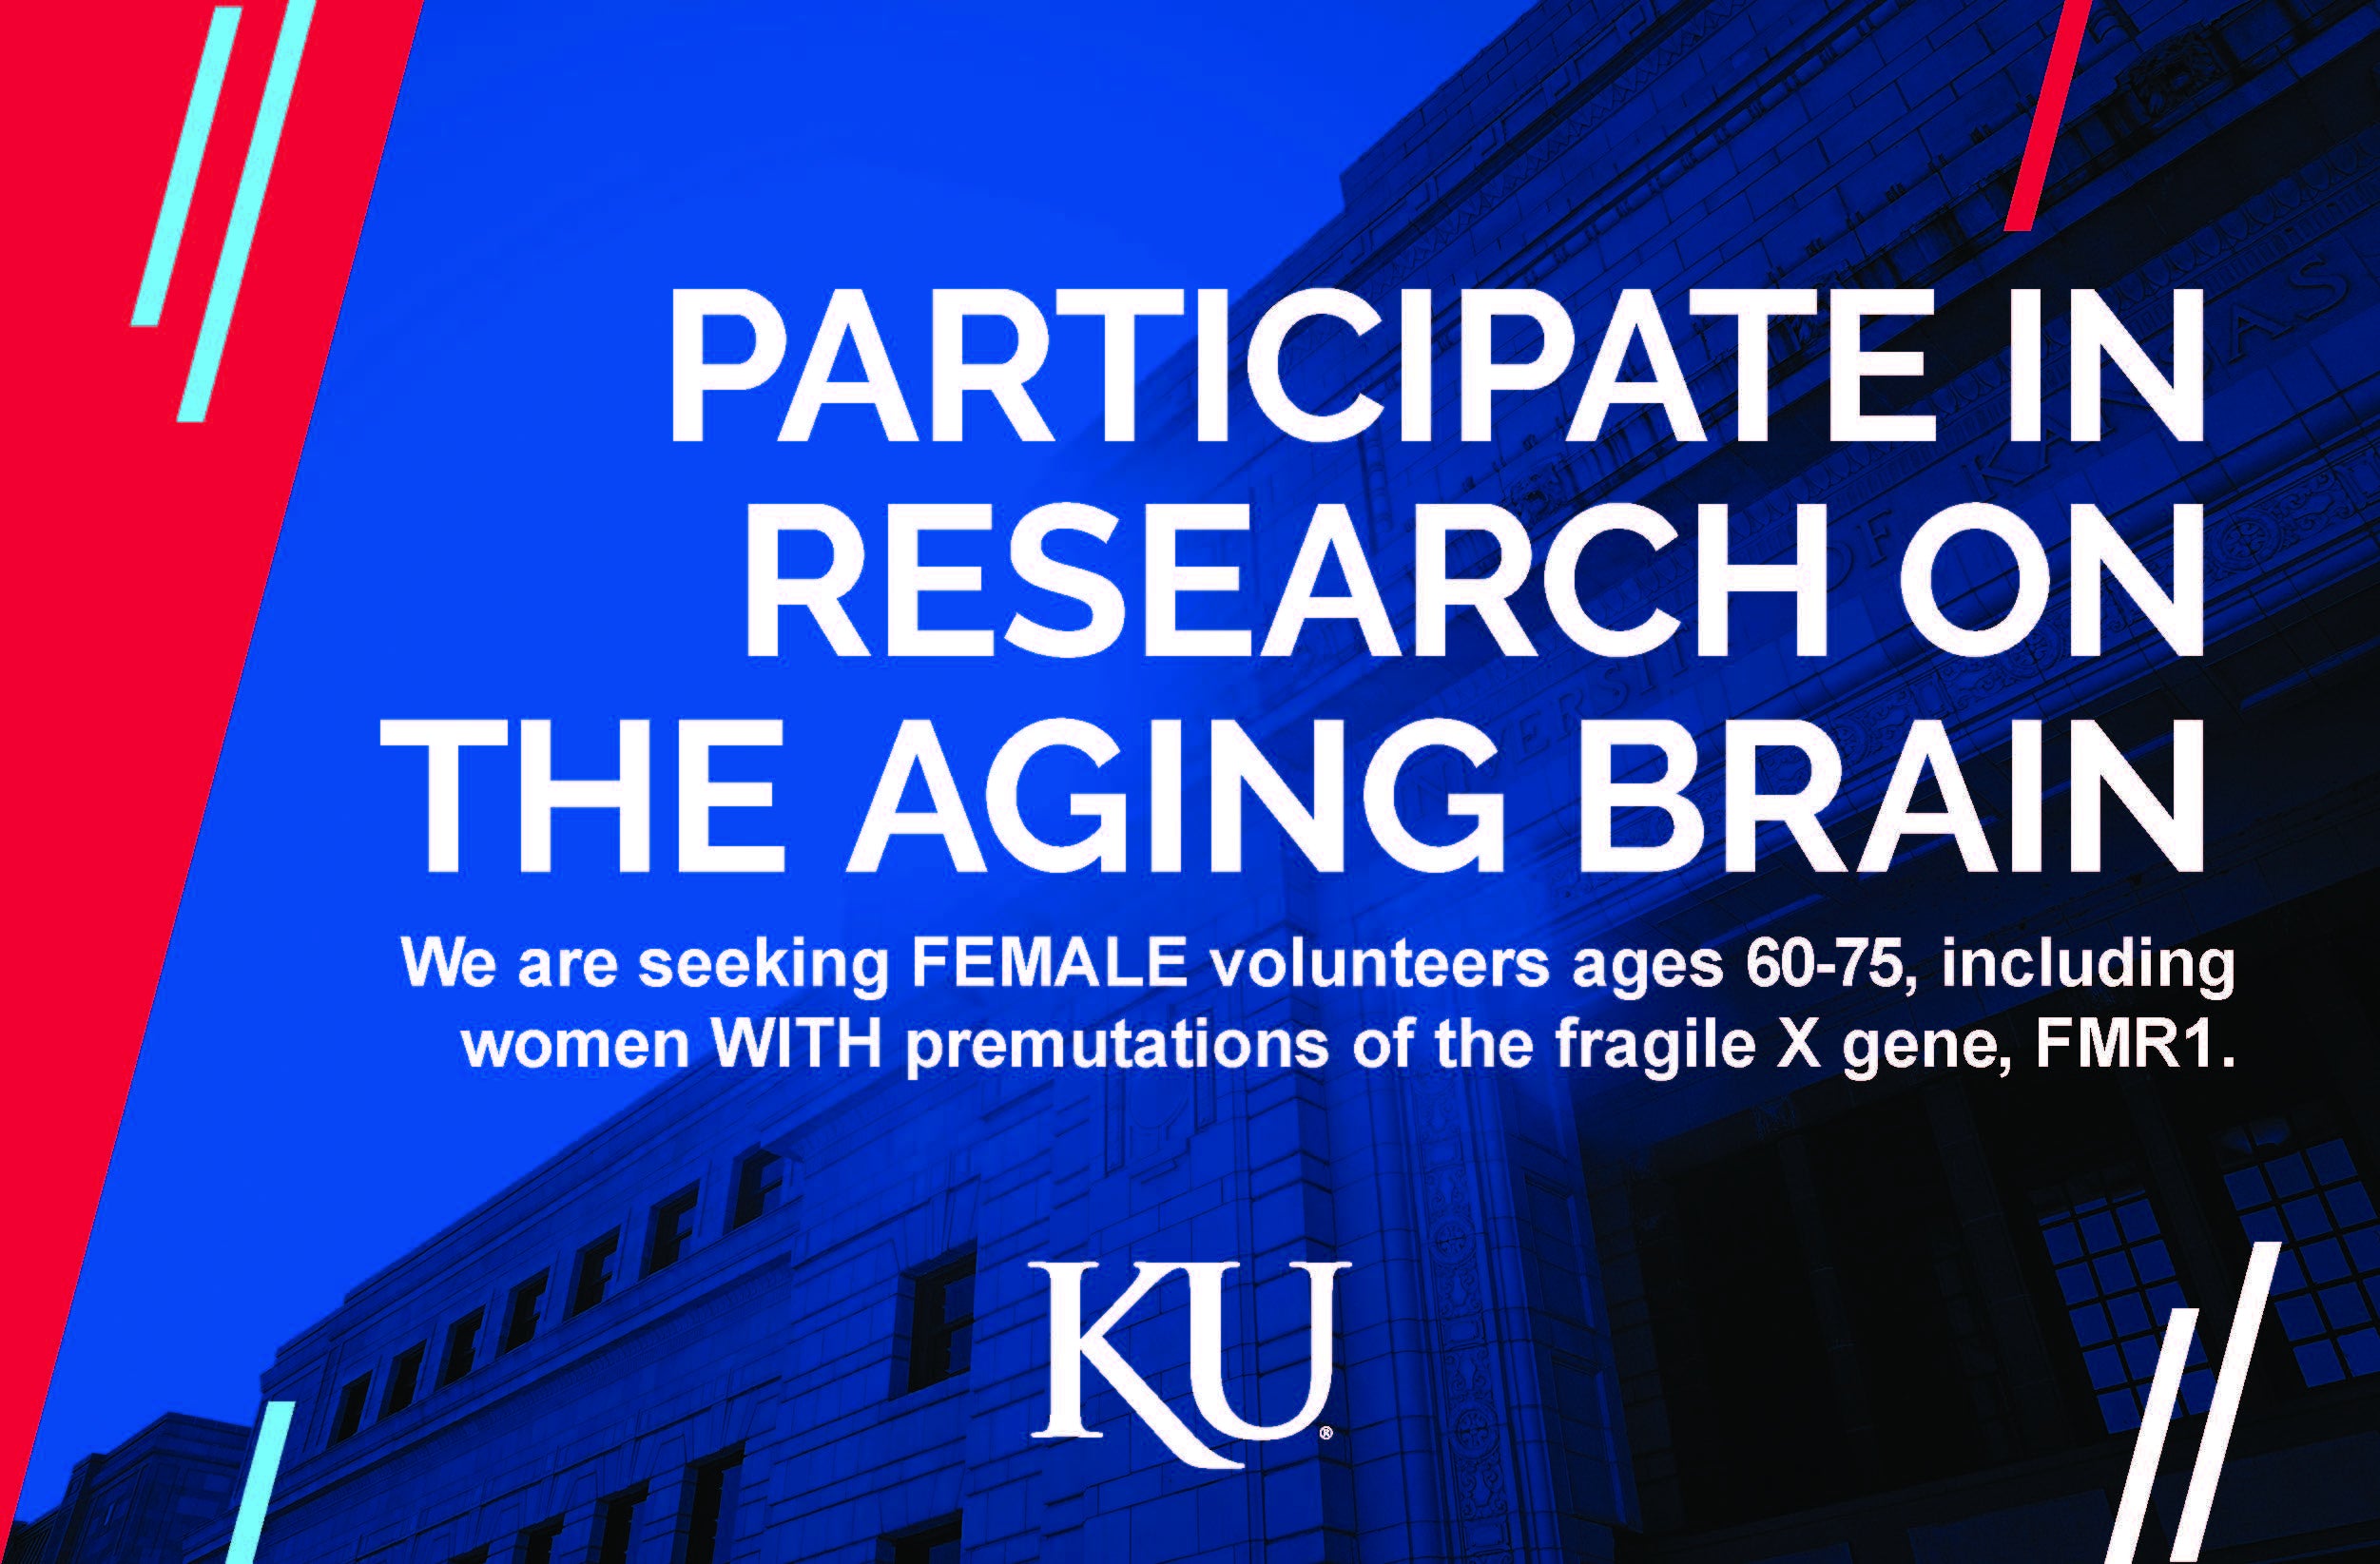 Postcard reading "Participate in research on the aging brain".